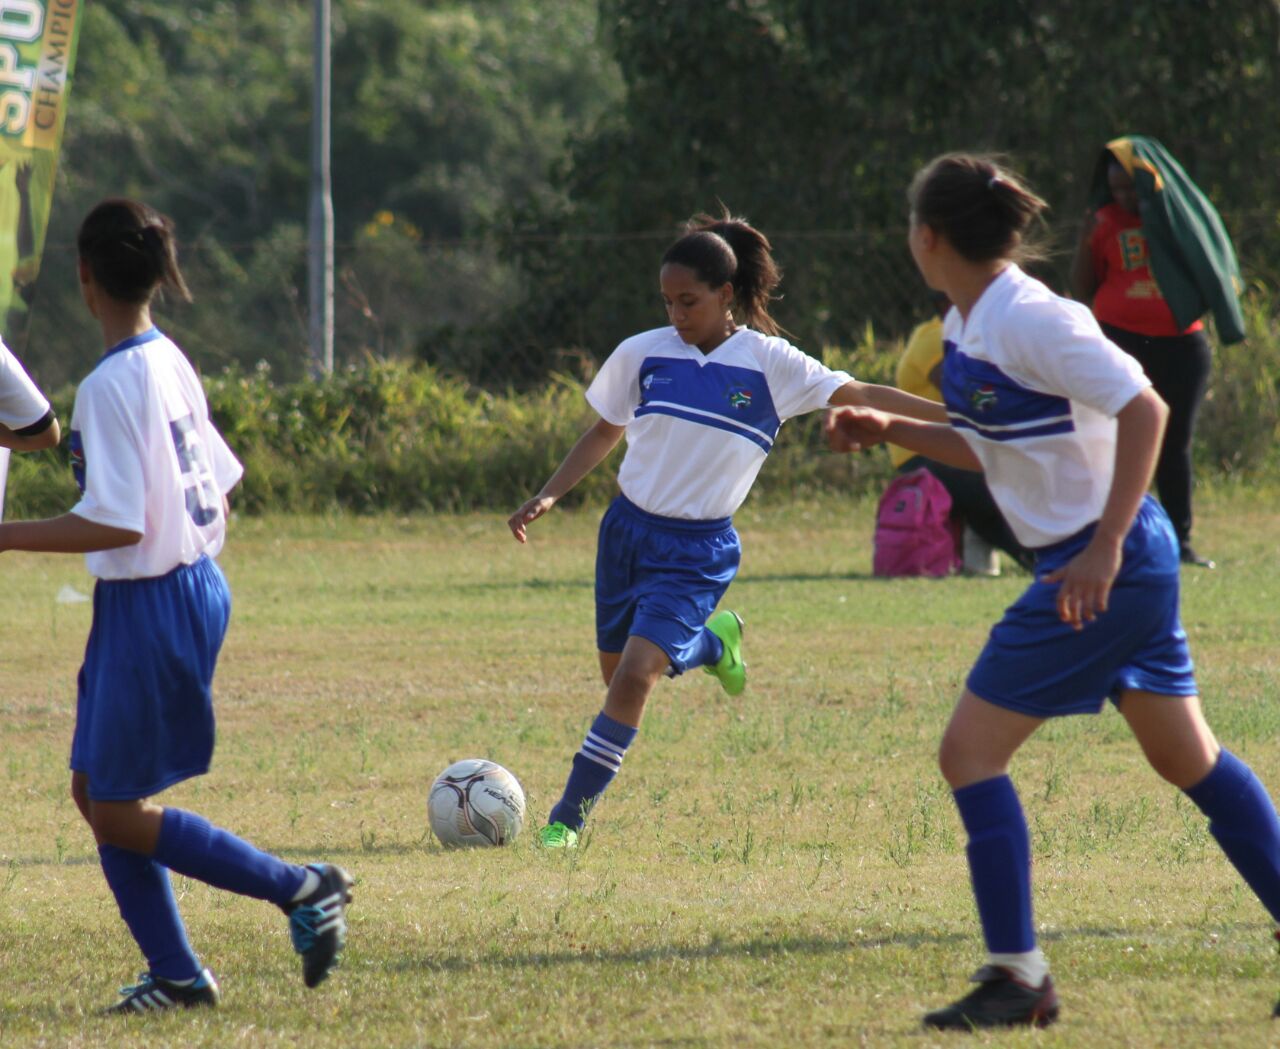 Girls football team in action